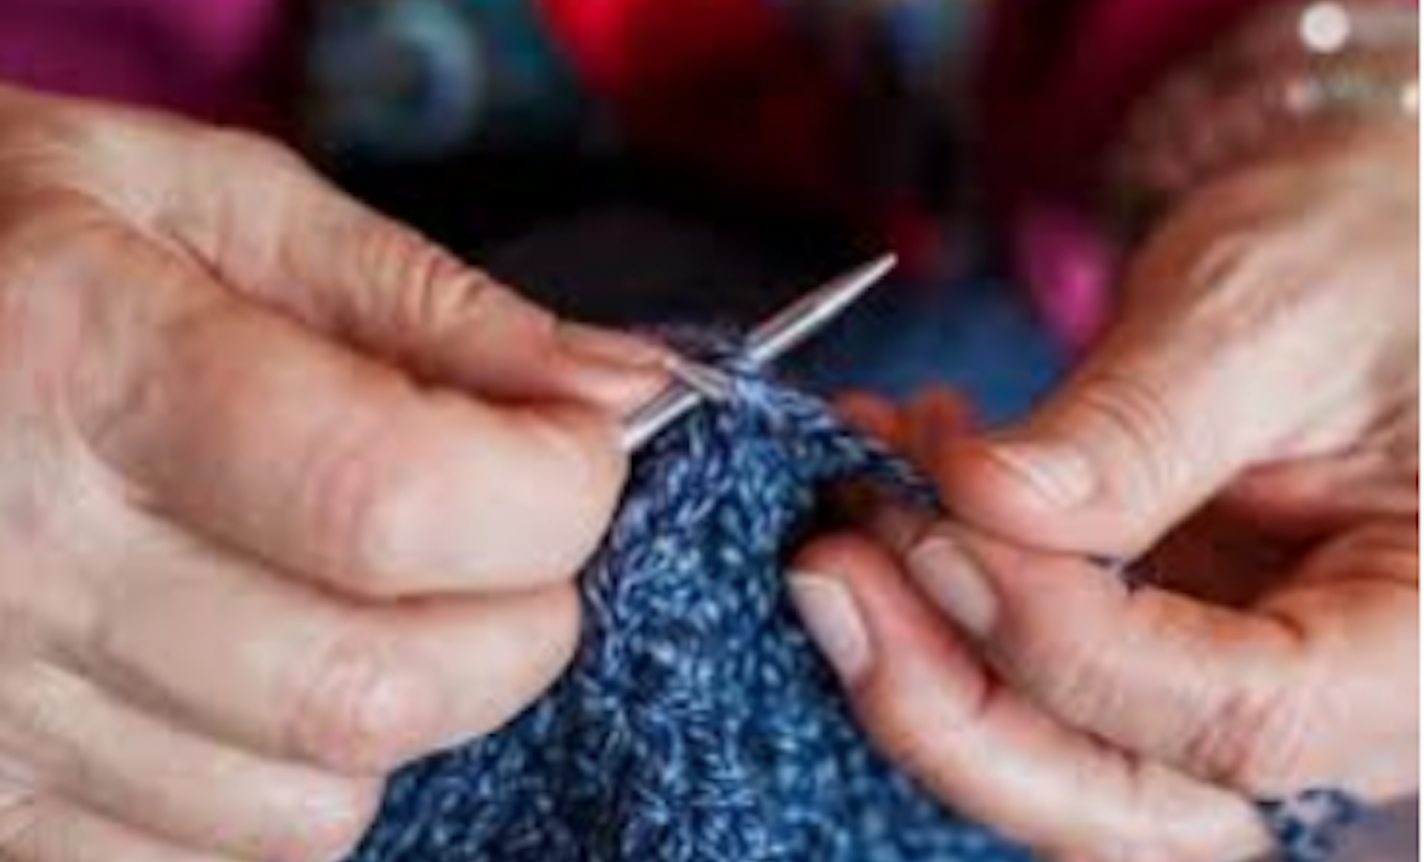 Knitting as a Proven Wellness Tool to Enhance Resilience